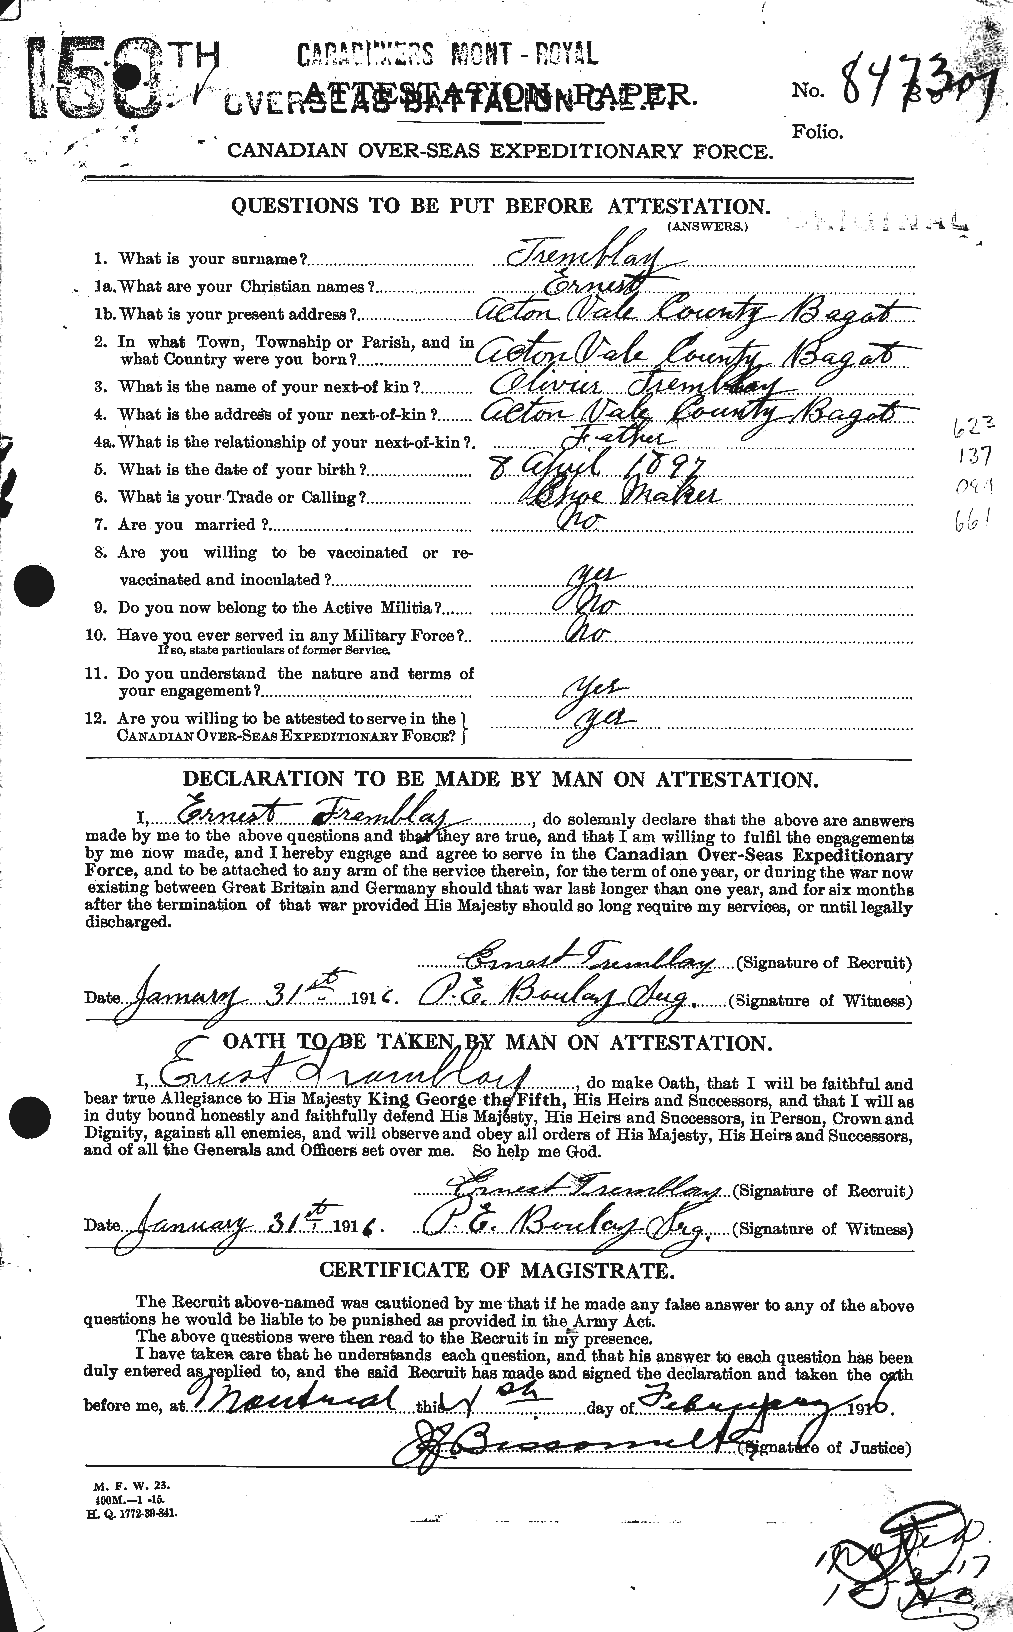 Personnel Records of the First World War - CEF 639029a